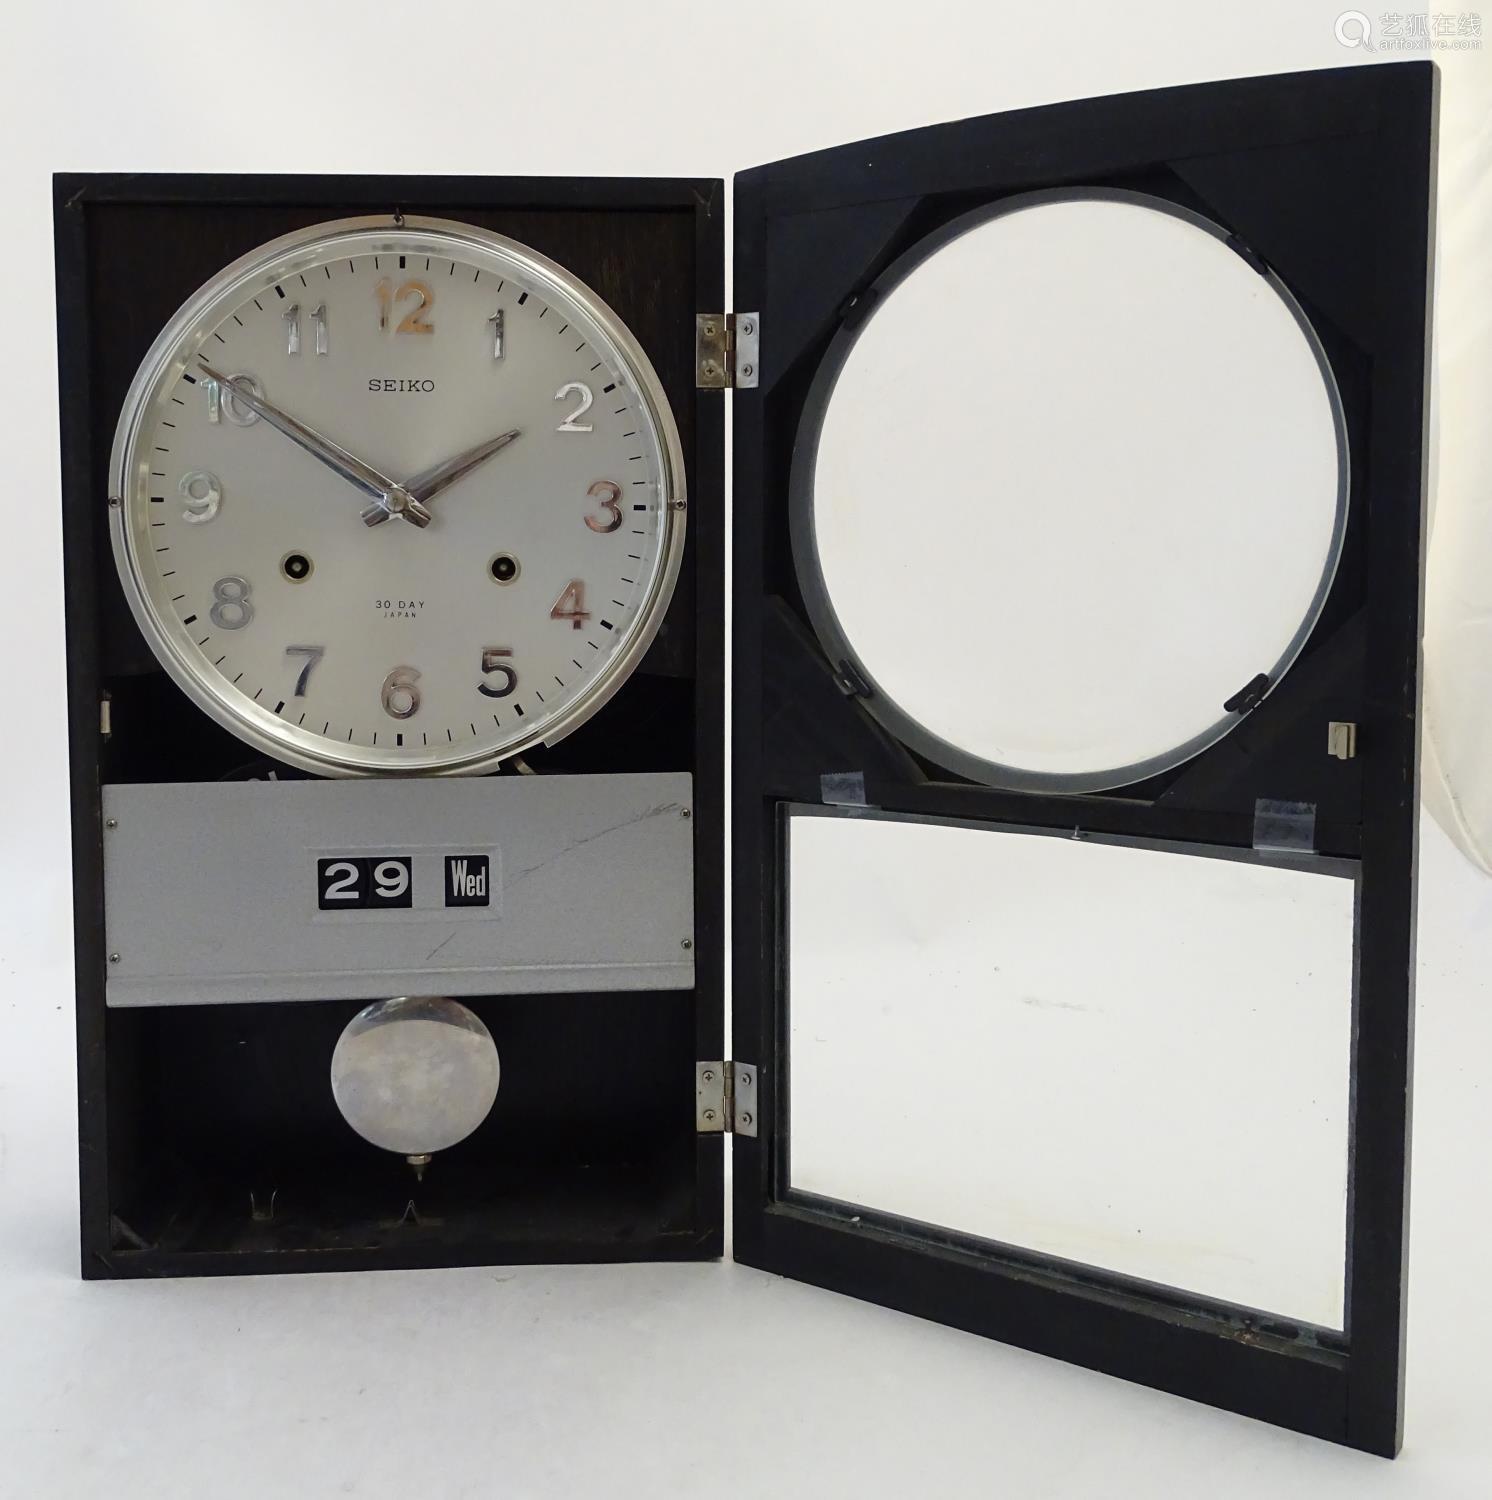 Vintage Retro, Mid-Century: a 30 Day wall clock by Seiko, Japan, the 8 1/2